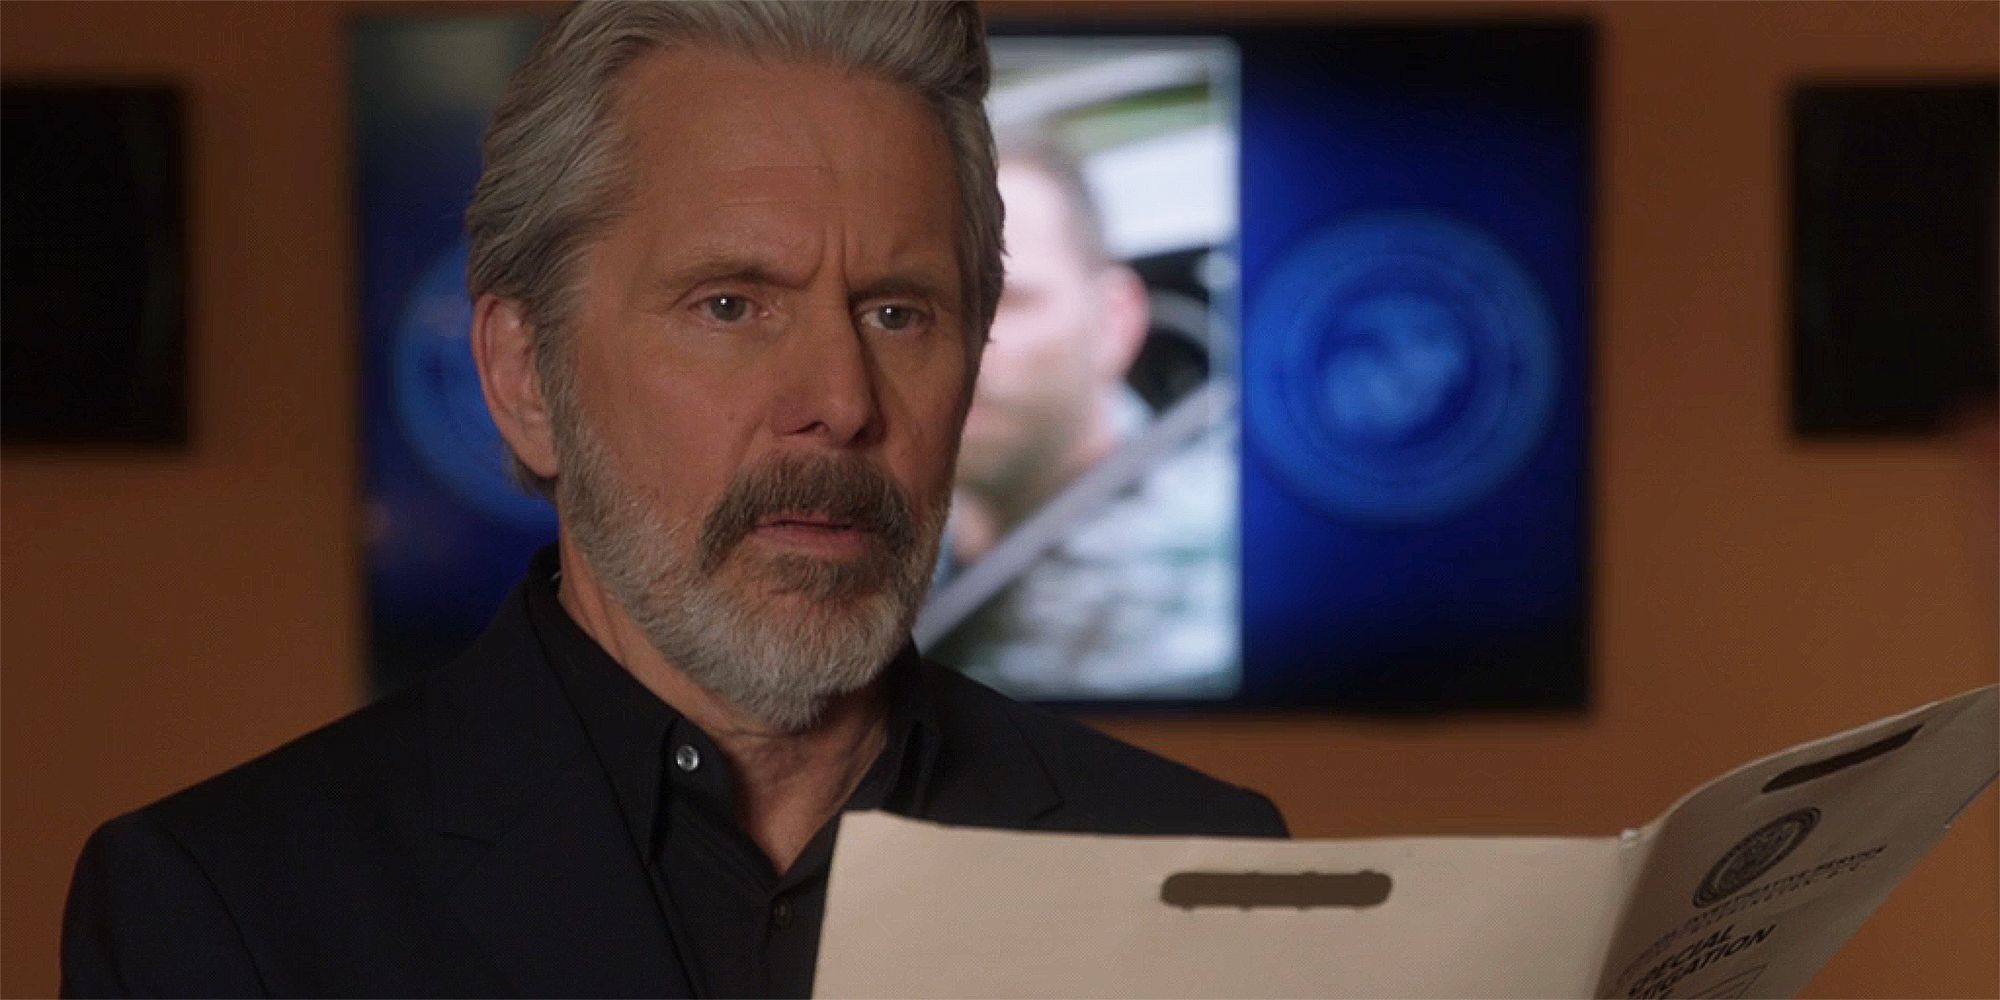 NCIS Season 21 Ending & Gary Cole’s Potential Exit Teased By Cast